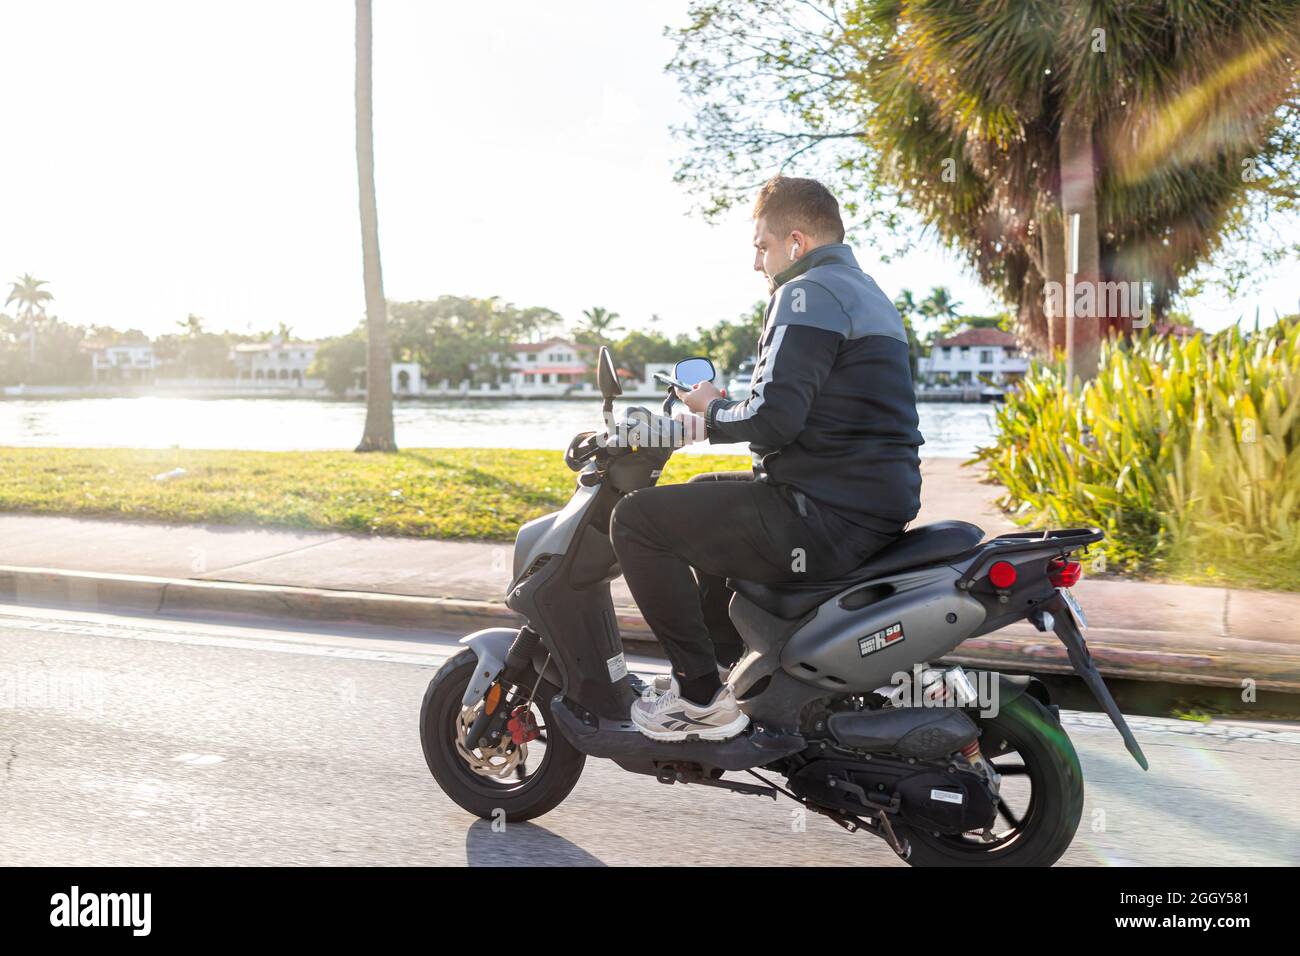 Miami Beach, USA - January 19, 2021: Young man riding motorcycle scooter in danger of accident while using smartphone mobile phone on city street road Stock Photo